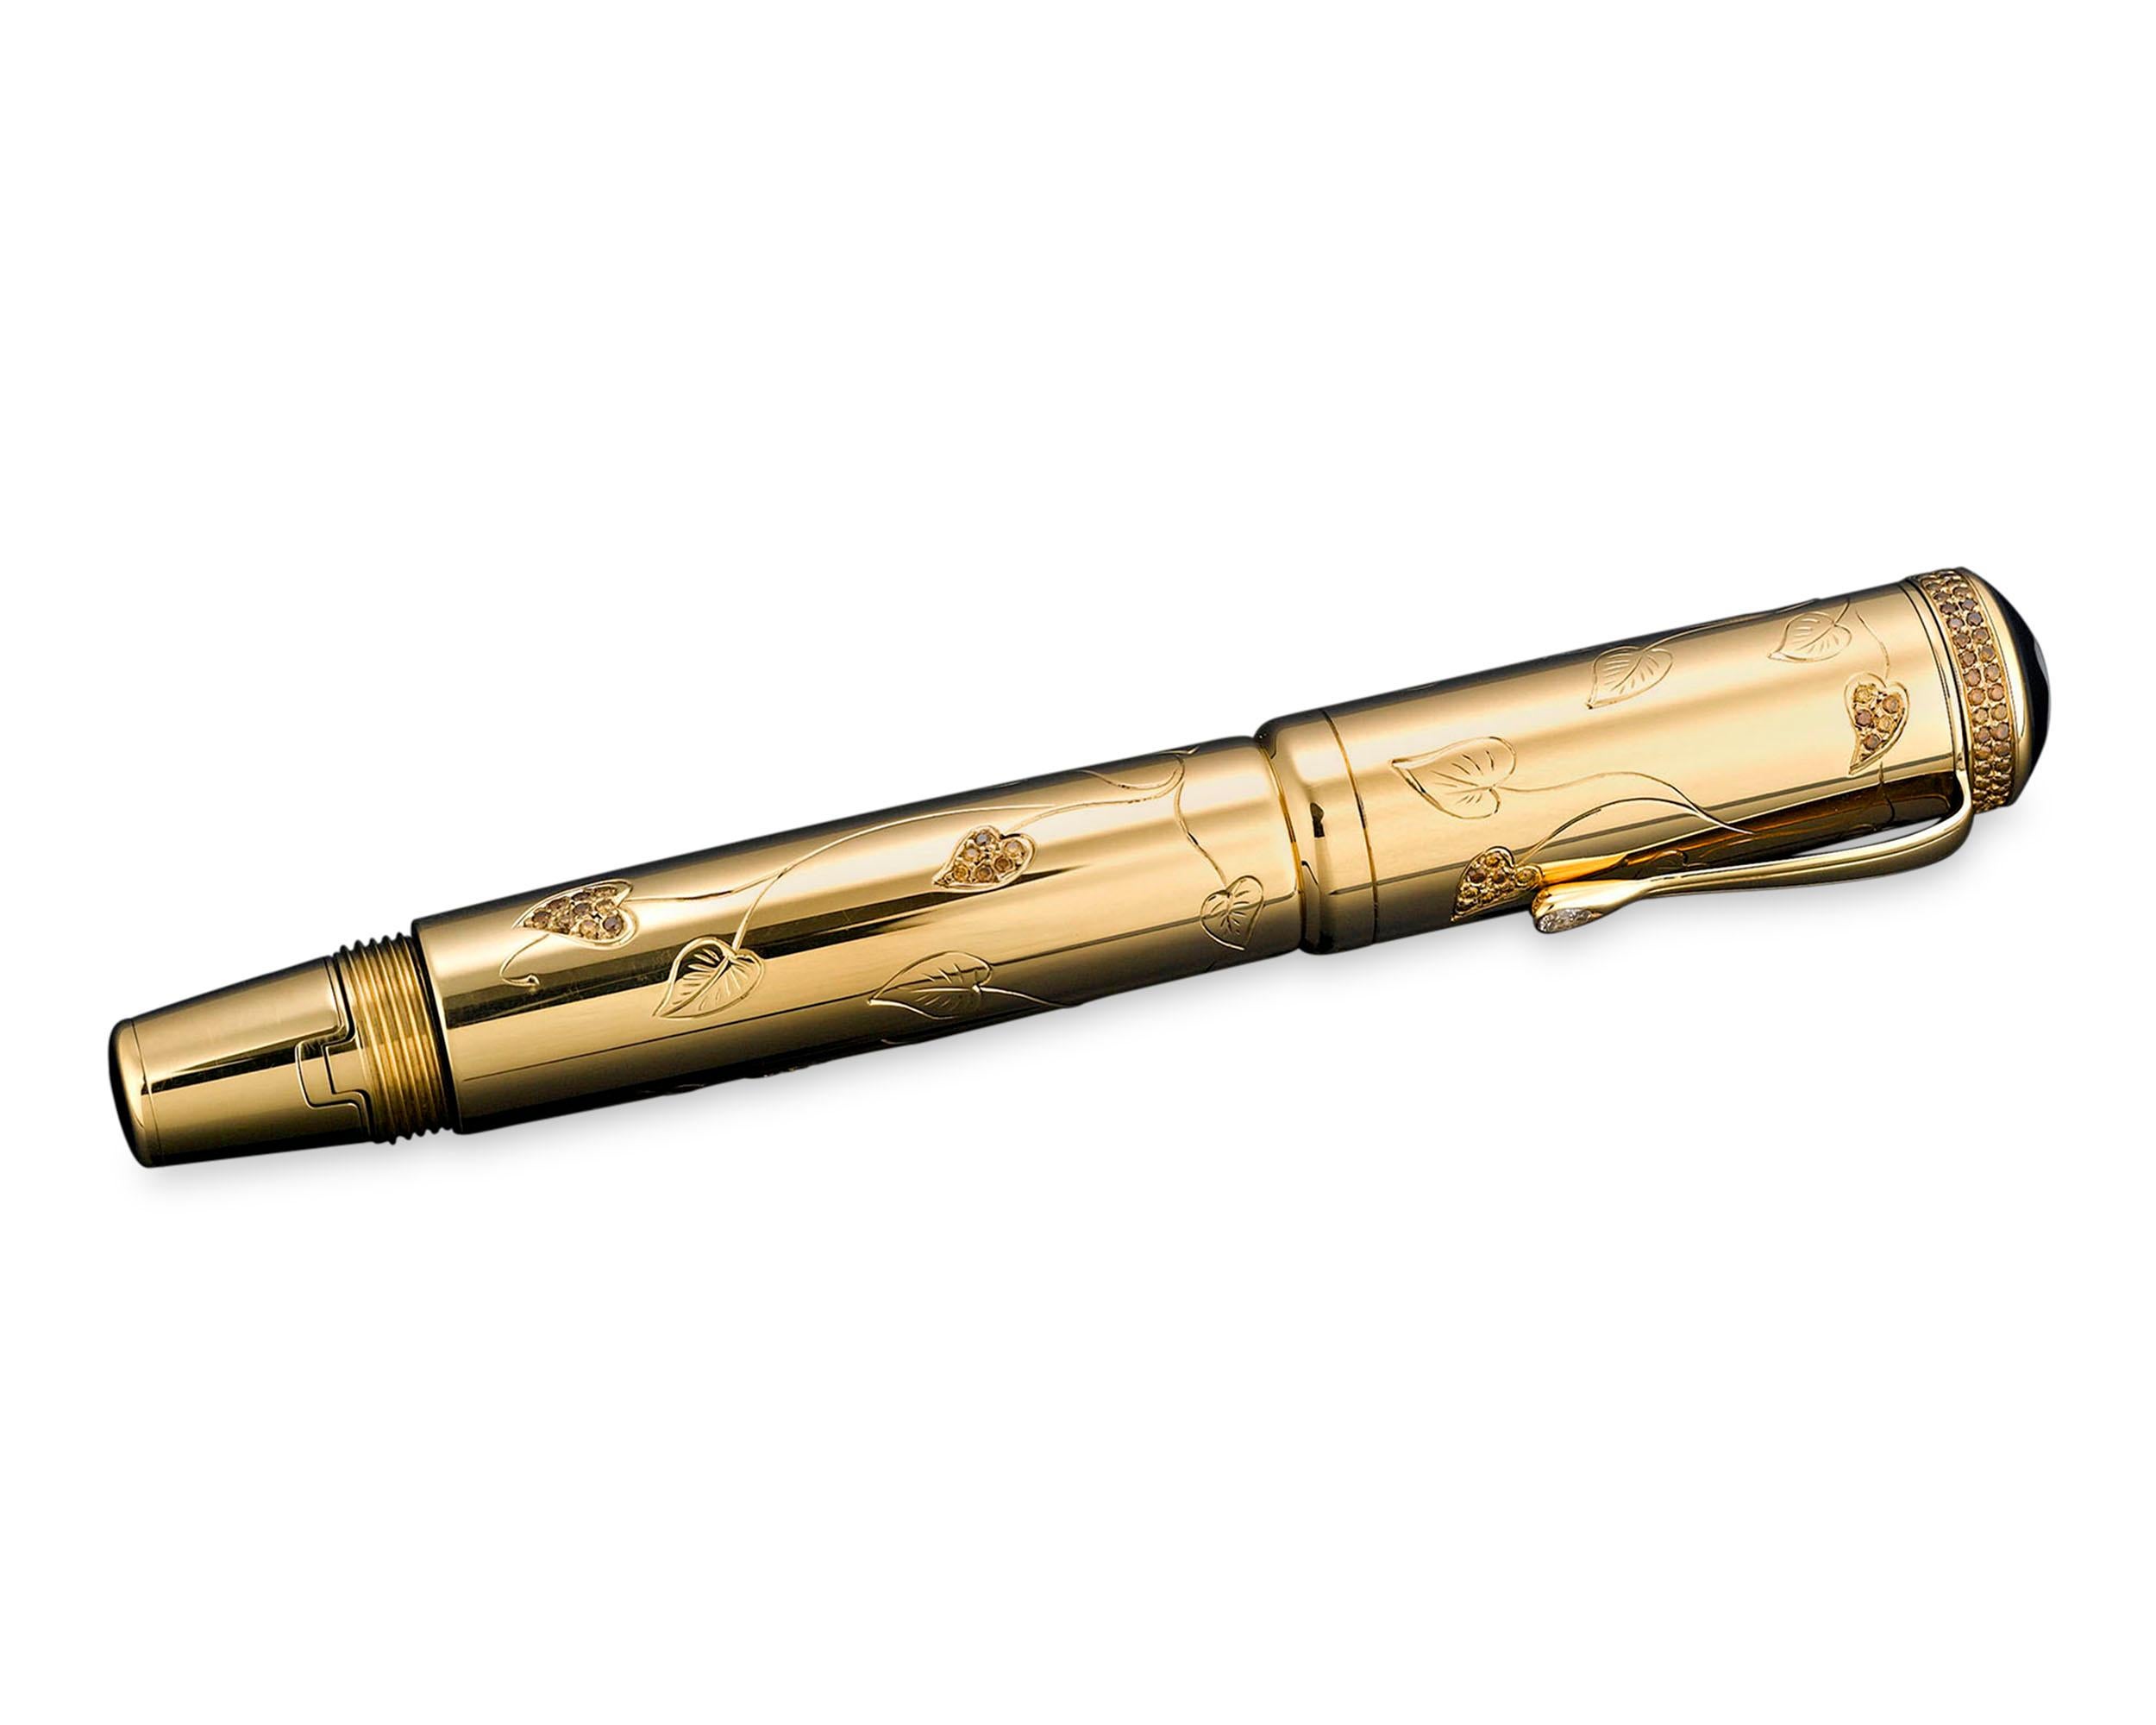 The art of writing reaches epic heights with this exquisite, limited edition Montblanc fountain pen. This rare and stunning instrument represents Autumn in the renowned firm's exclusive Four Seasons collection, and is one of only a handful in the